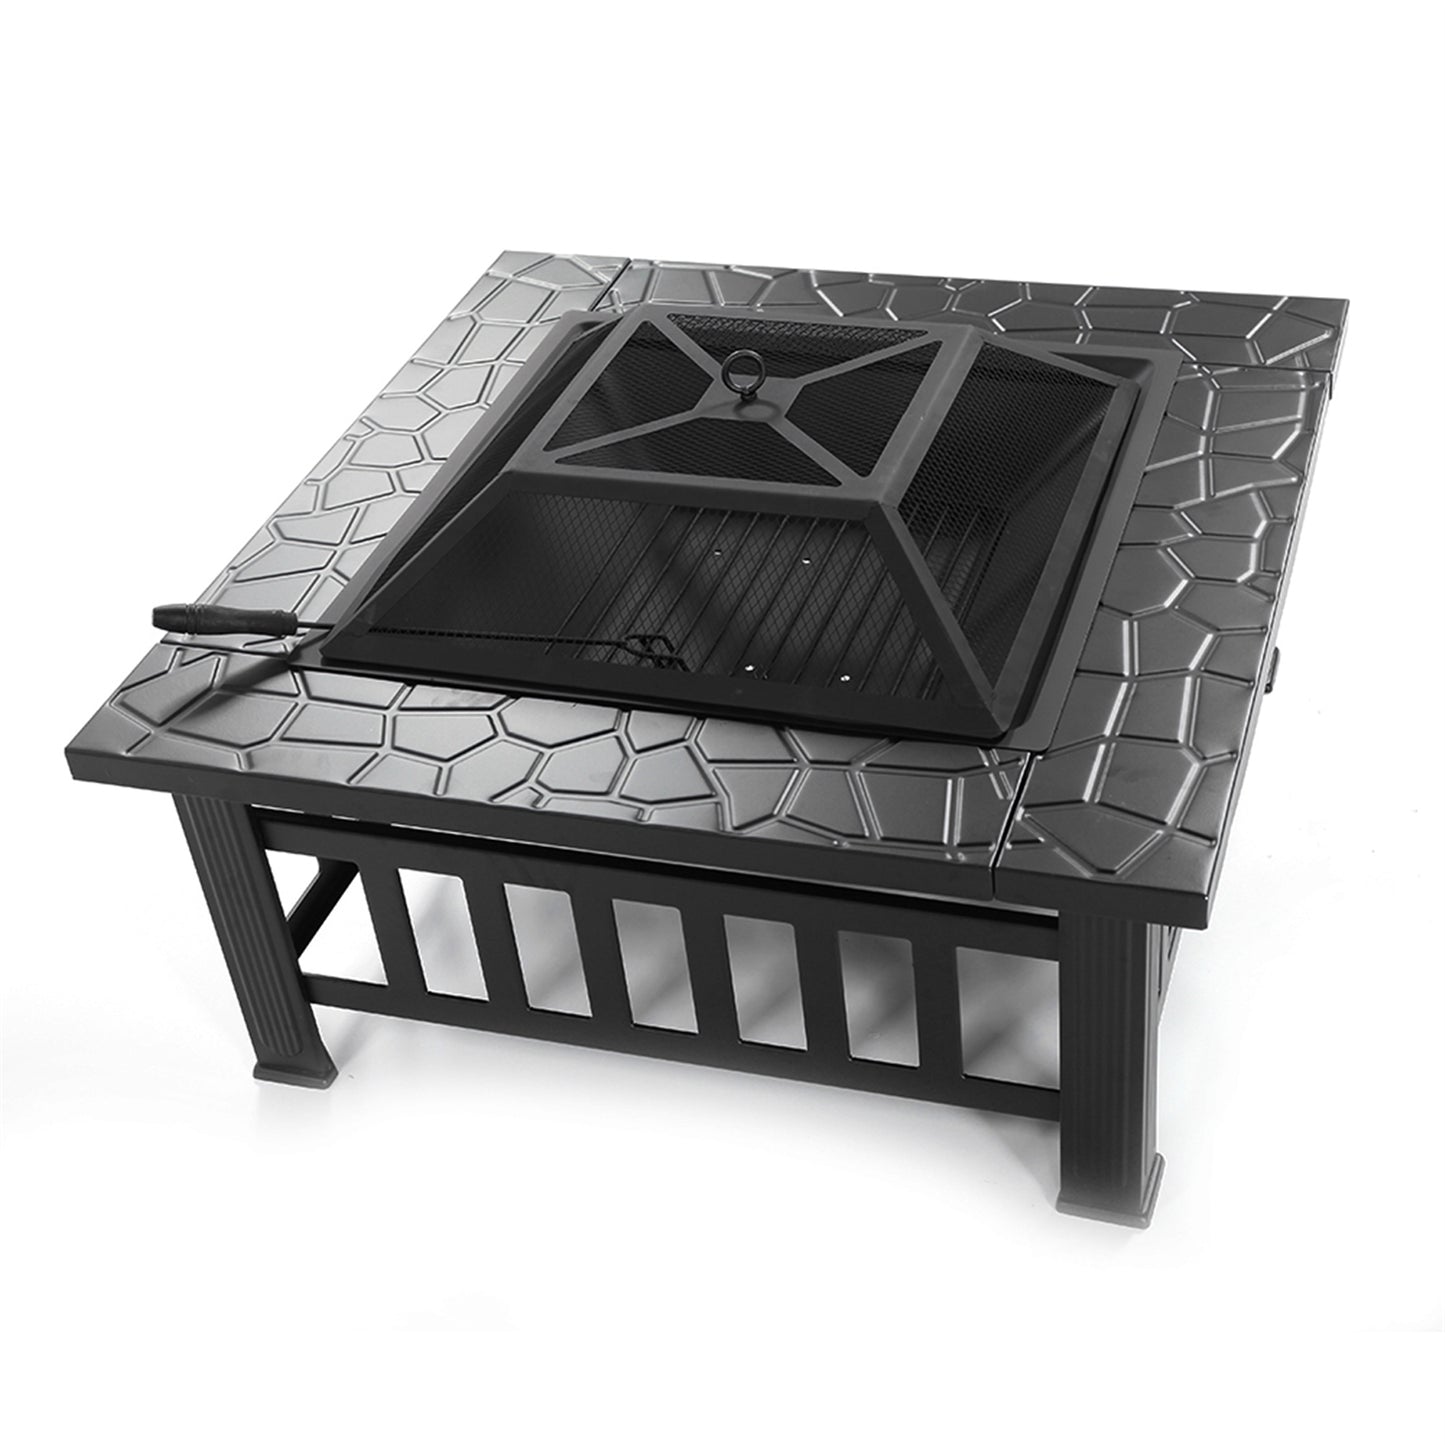 32 Inch Square Metal Fire Pit, Outdoor Wood Burning Bonfire Stove with Mesh Lid, Grate, BBQ Grill and Poker, Portable Charcoal Grill Fire Stove for Camping, Picnic, Party, Backyard, C12